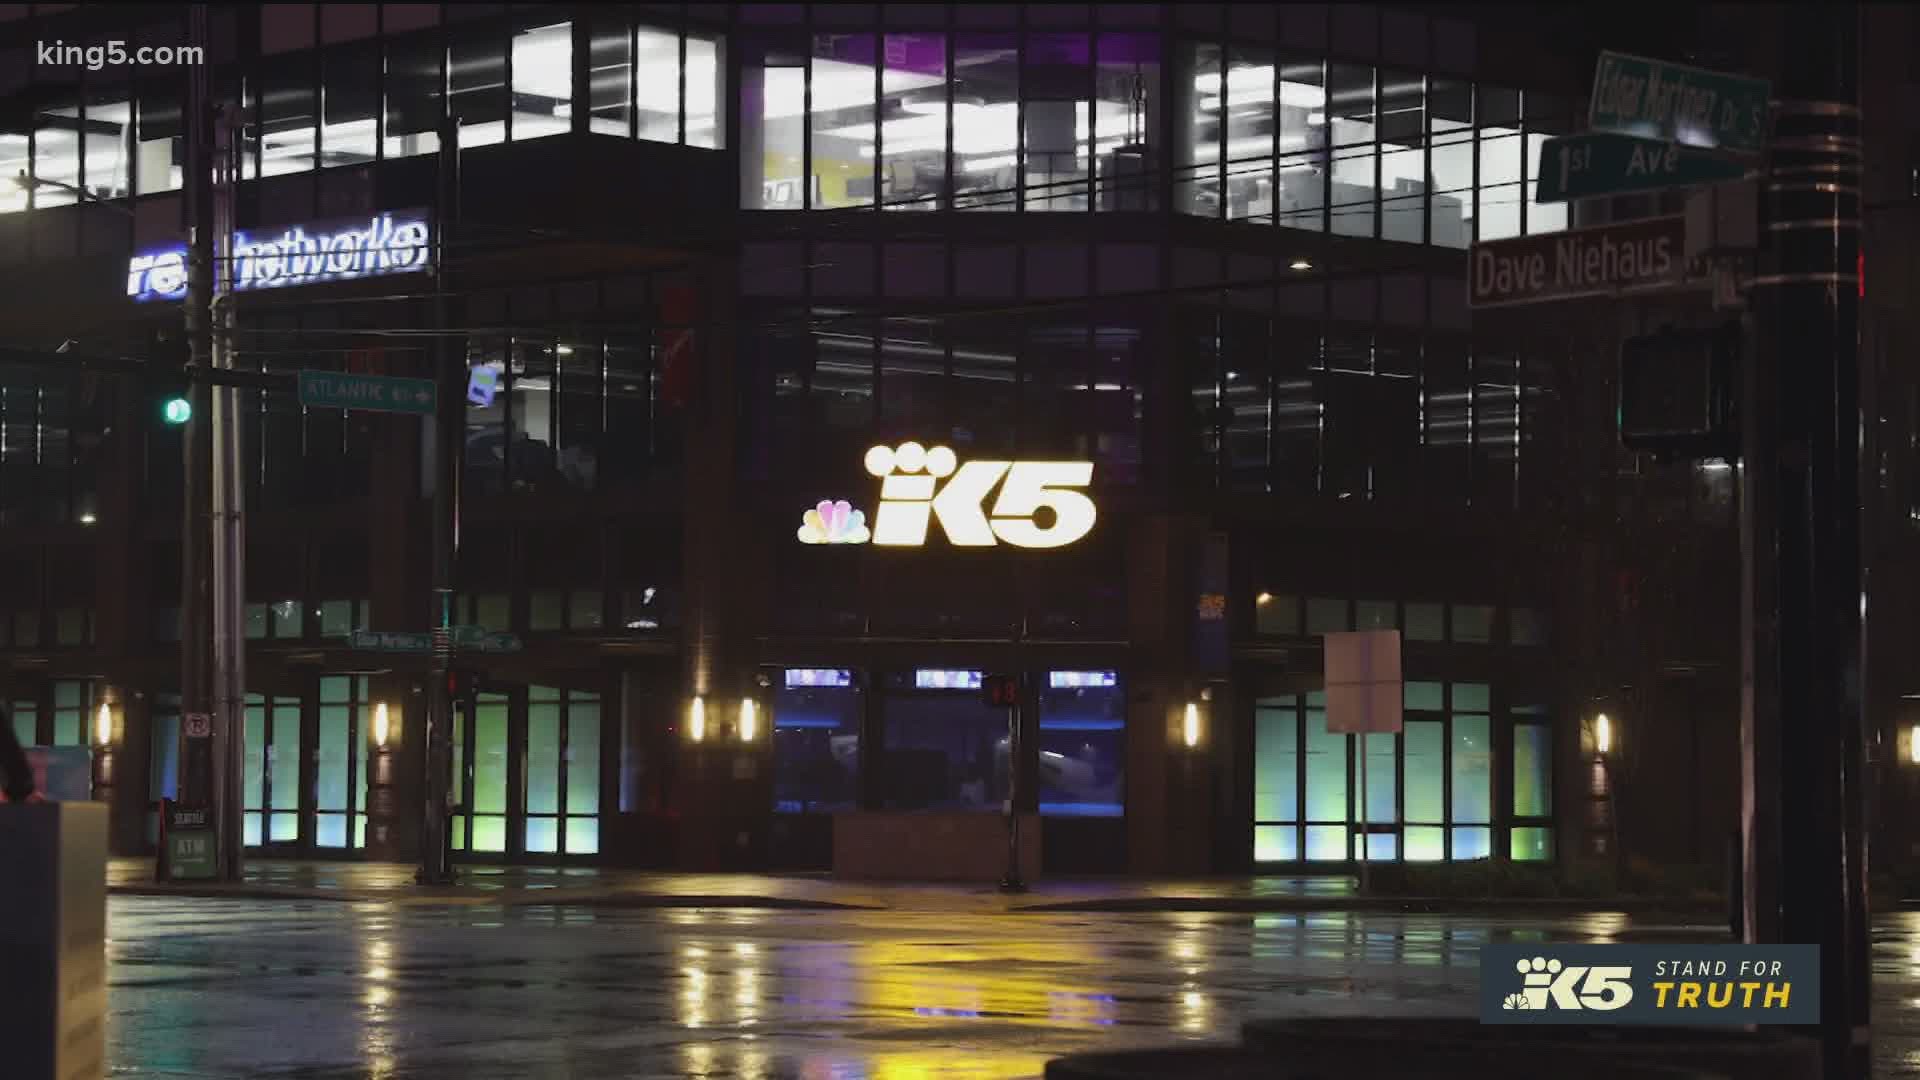 KING 5 is grappling with its internal struggles with race in the workplace and on TV.